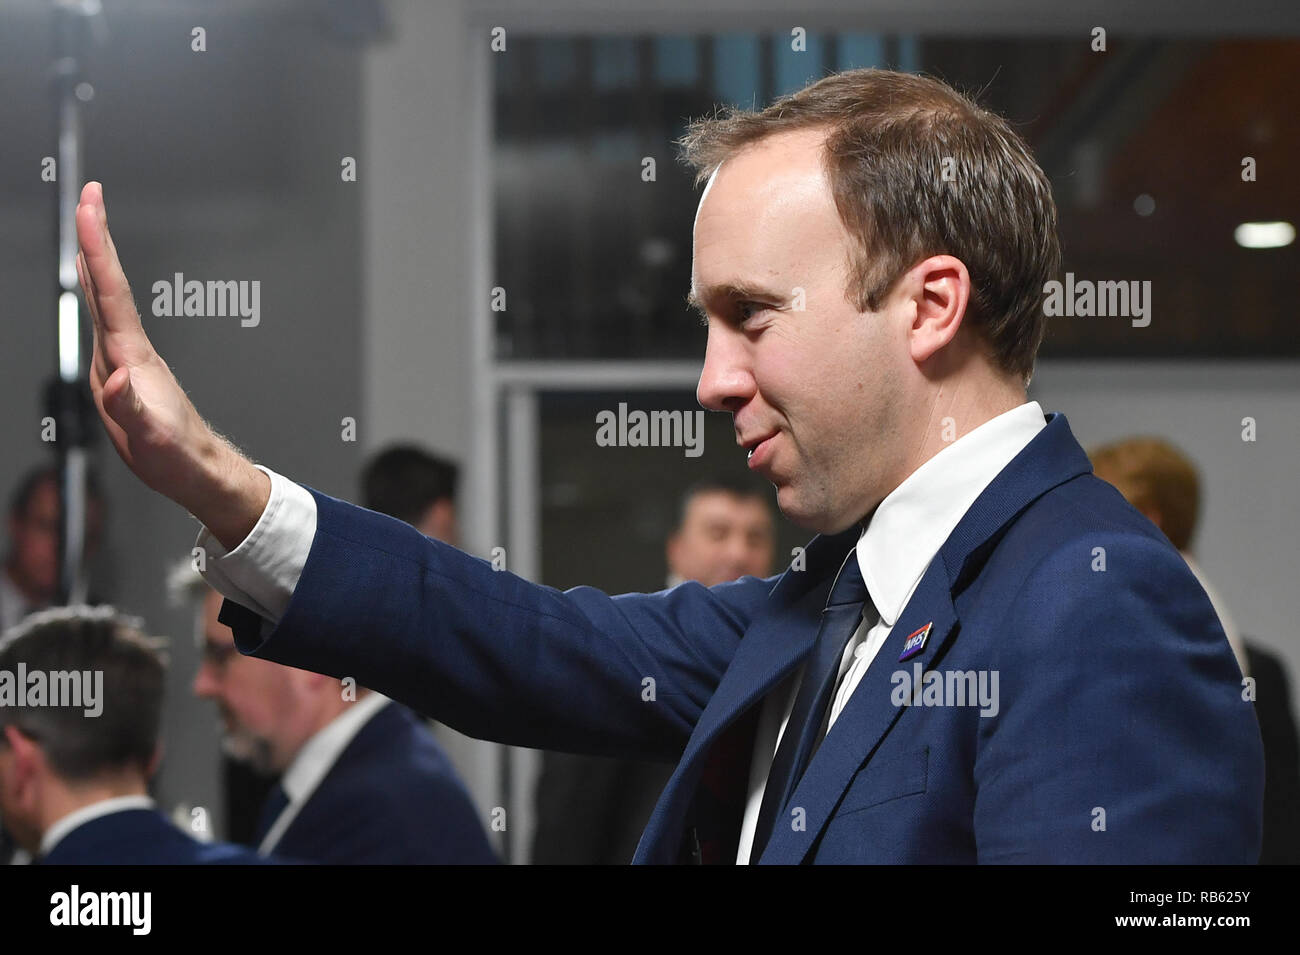 Health Secretary Matt Hancock gestures after Prime Minister Theresa May speaking at Alder Hey Children's Hospital, Liverpool during her visit where she launched the NHS Long Term Plan alongside NHS England Chief Executive Simon Stevens. Stock Photo